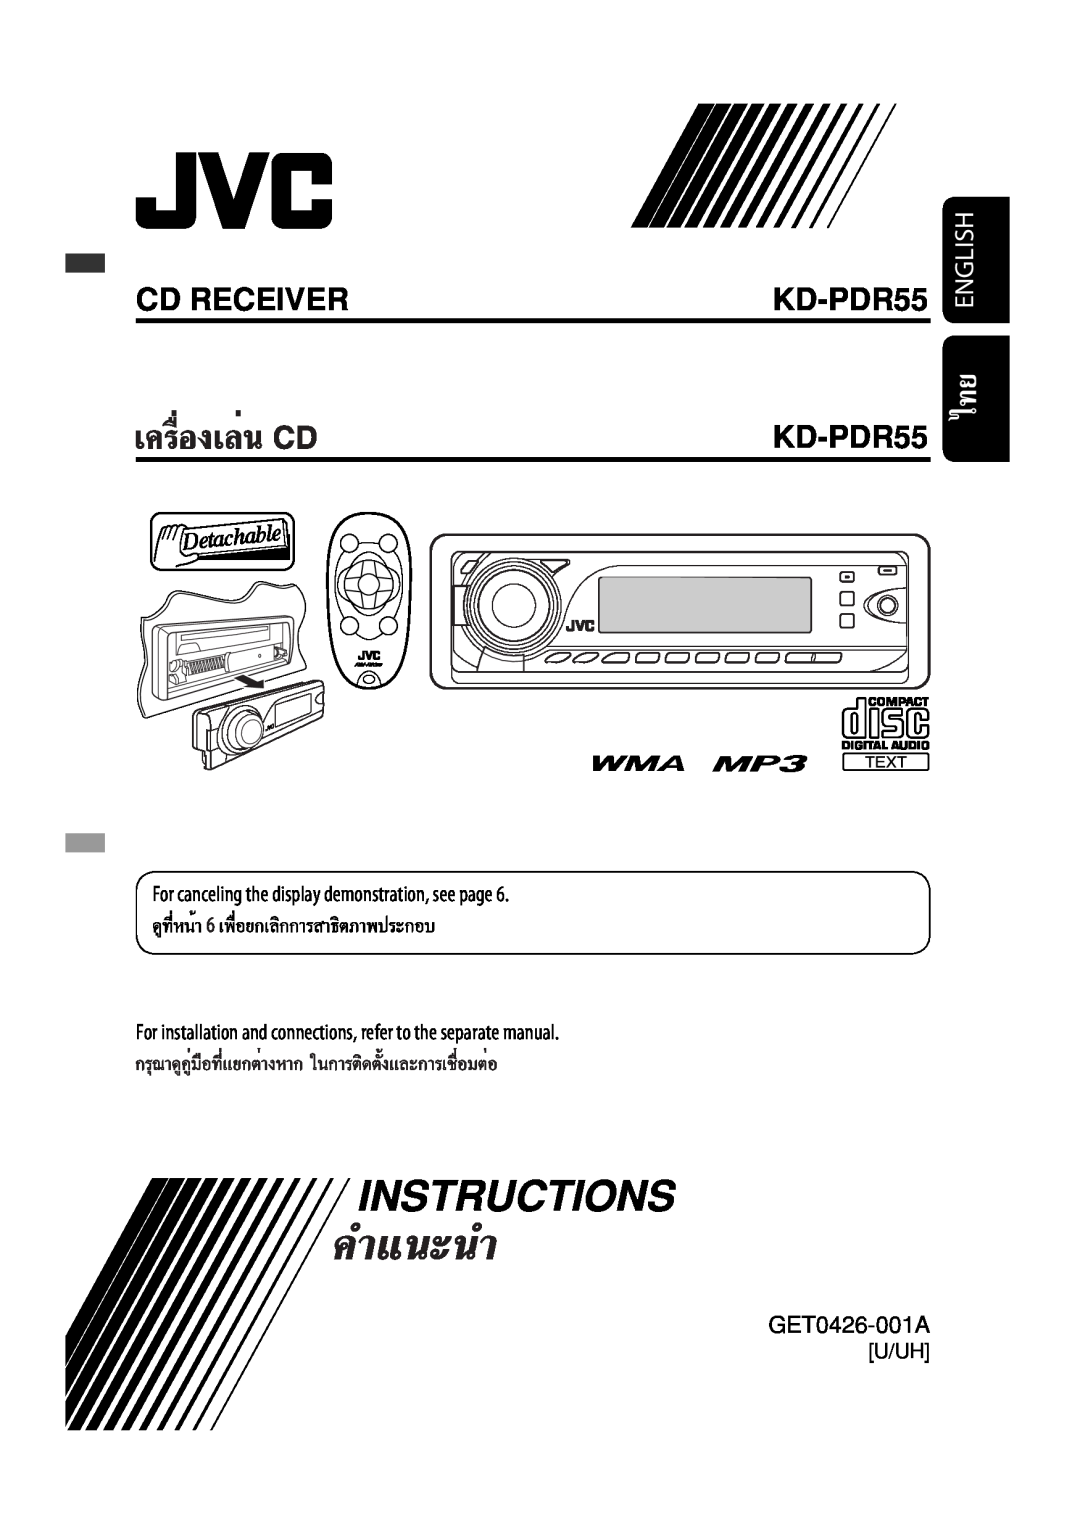 JVC GET0425-001A manual KD-PDR55 KD-PDR55, Instructions, Cd Receiver, English, GET0426-001A, U/Uh 